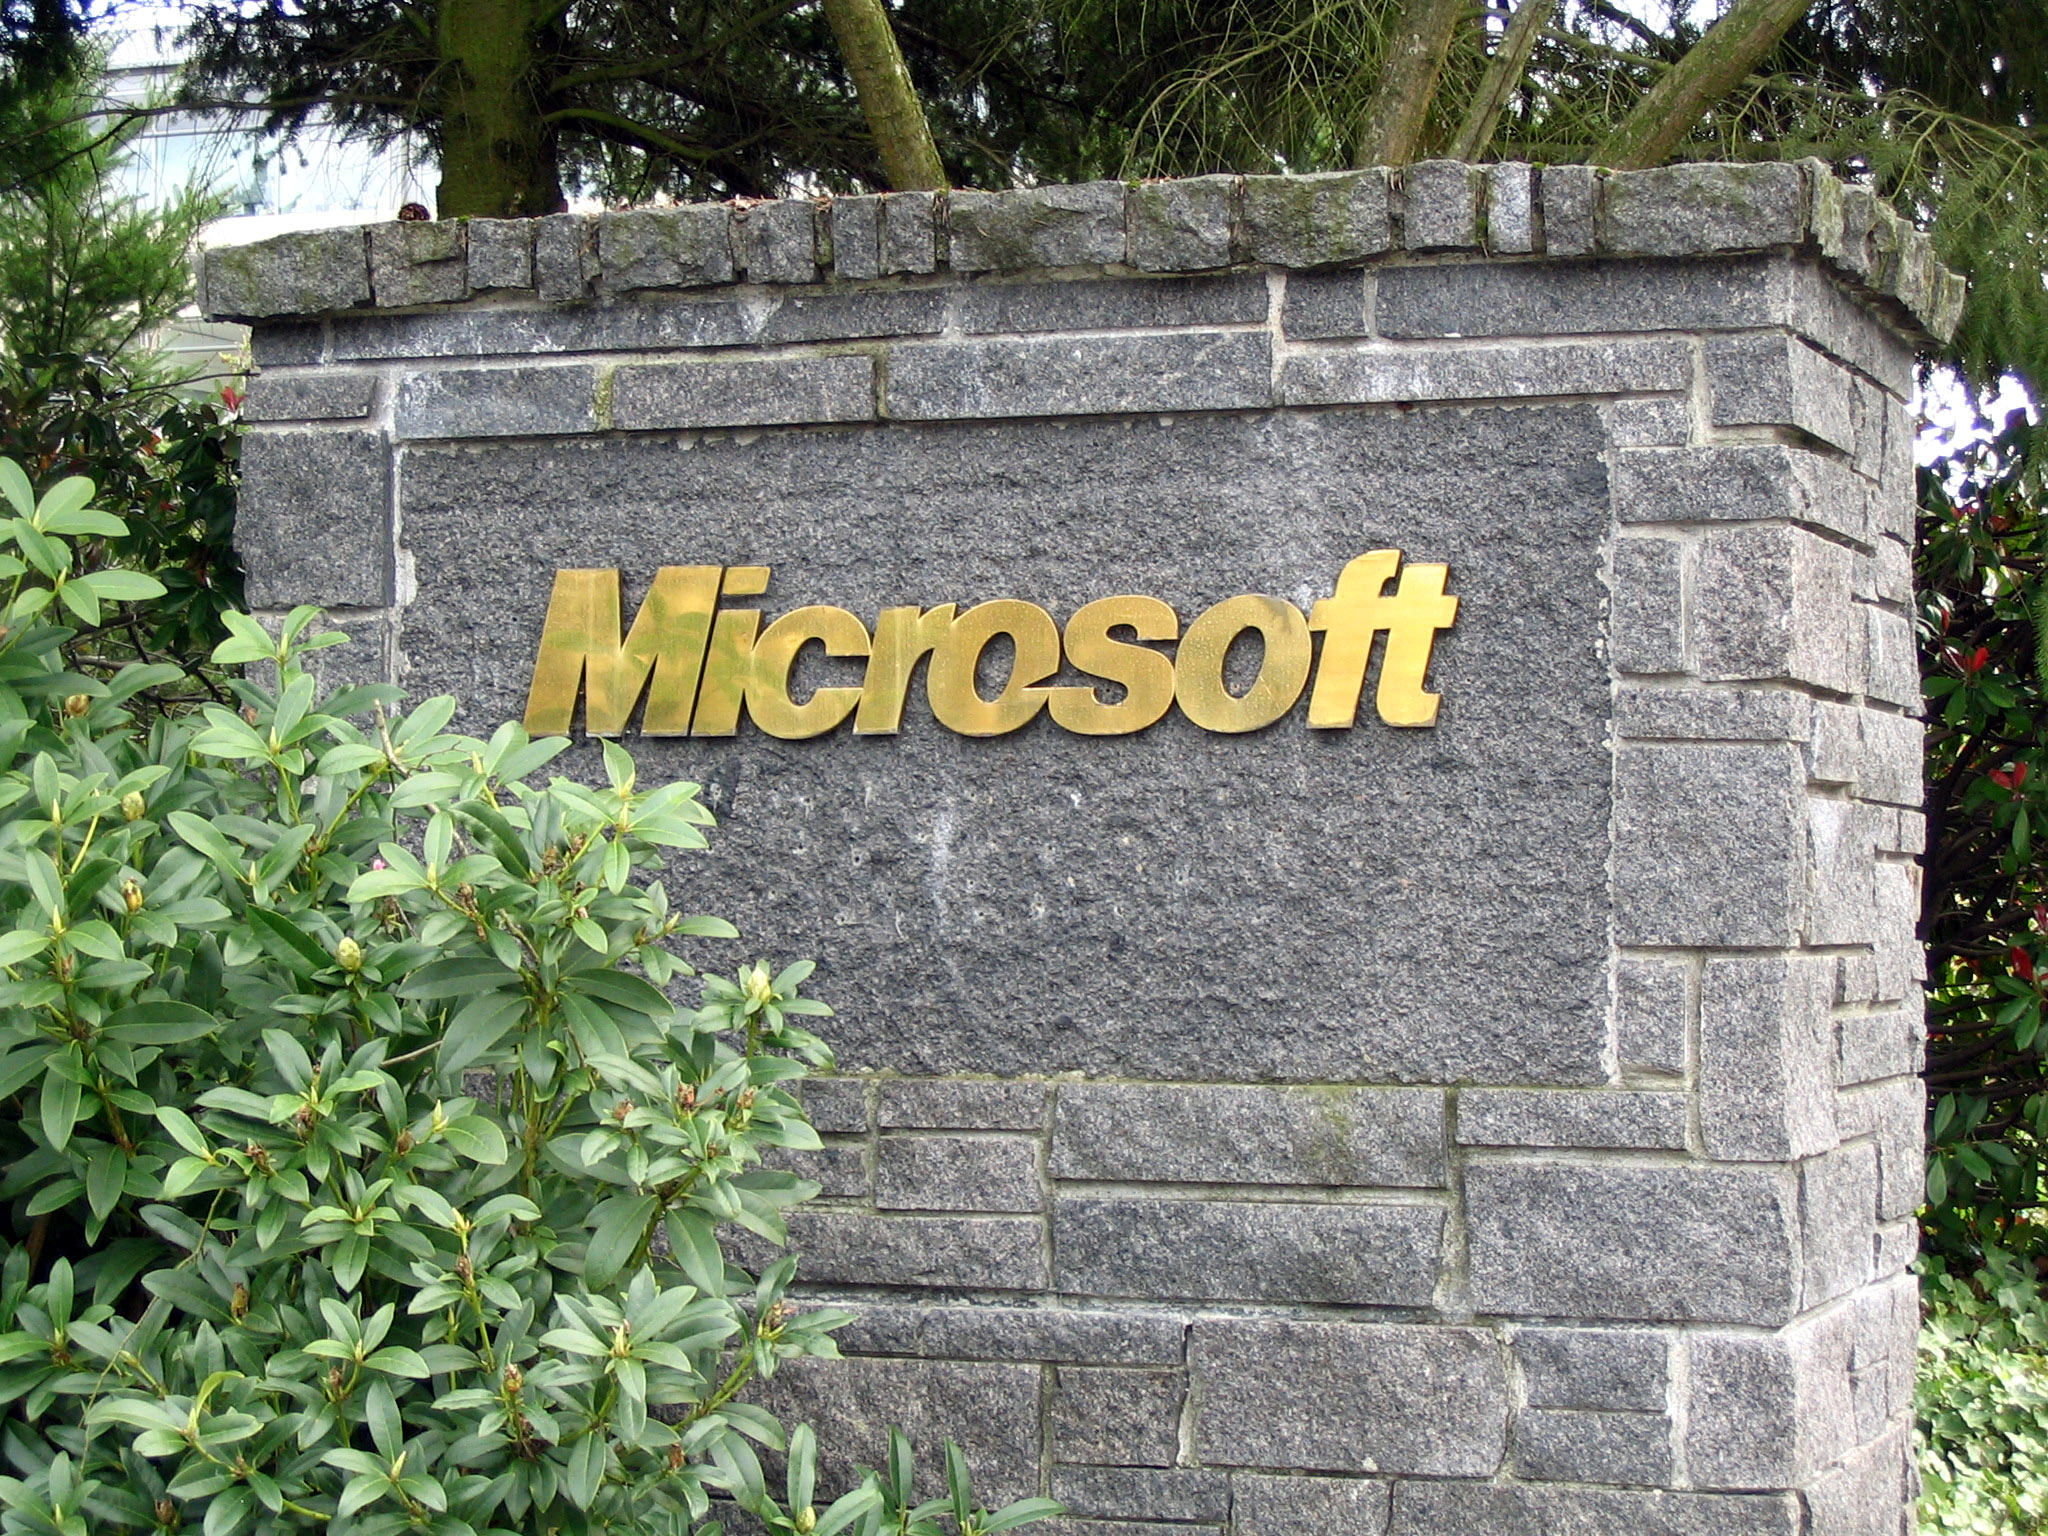 Microsoft Set To Cut 18,000 Jobs In The Next Year… Company’s Largest Cut Ever!